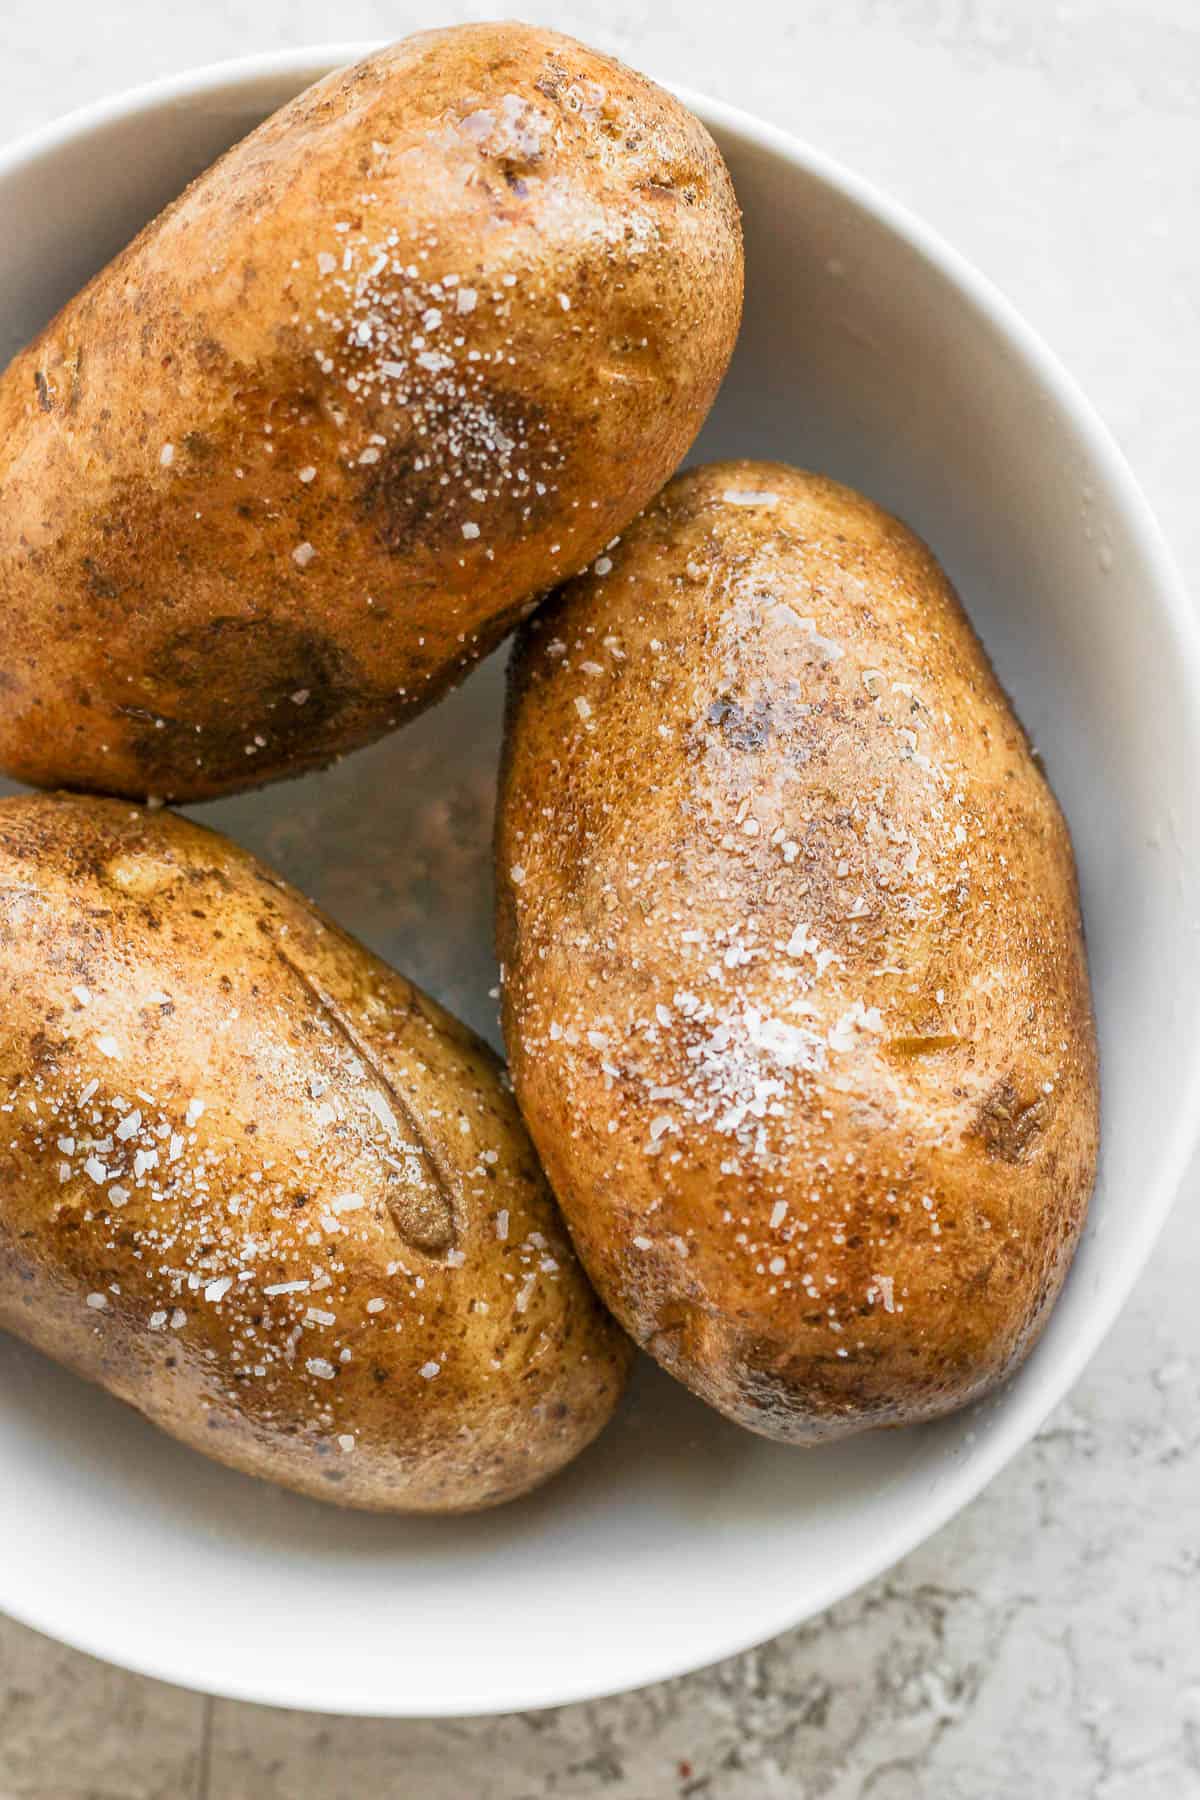 Whole baked potatoes in a white bowl.